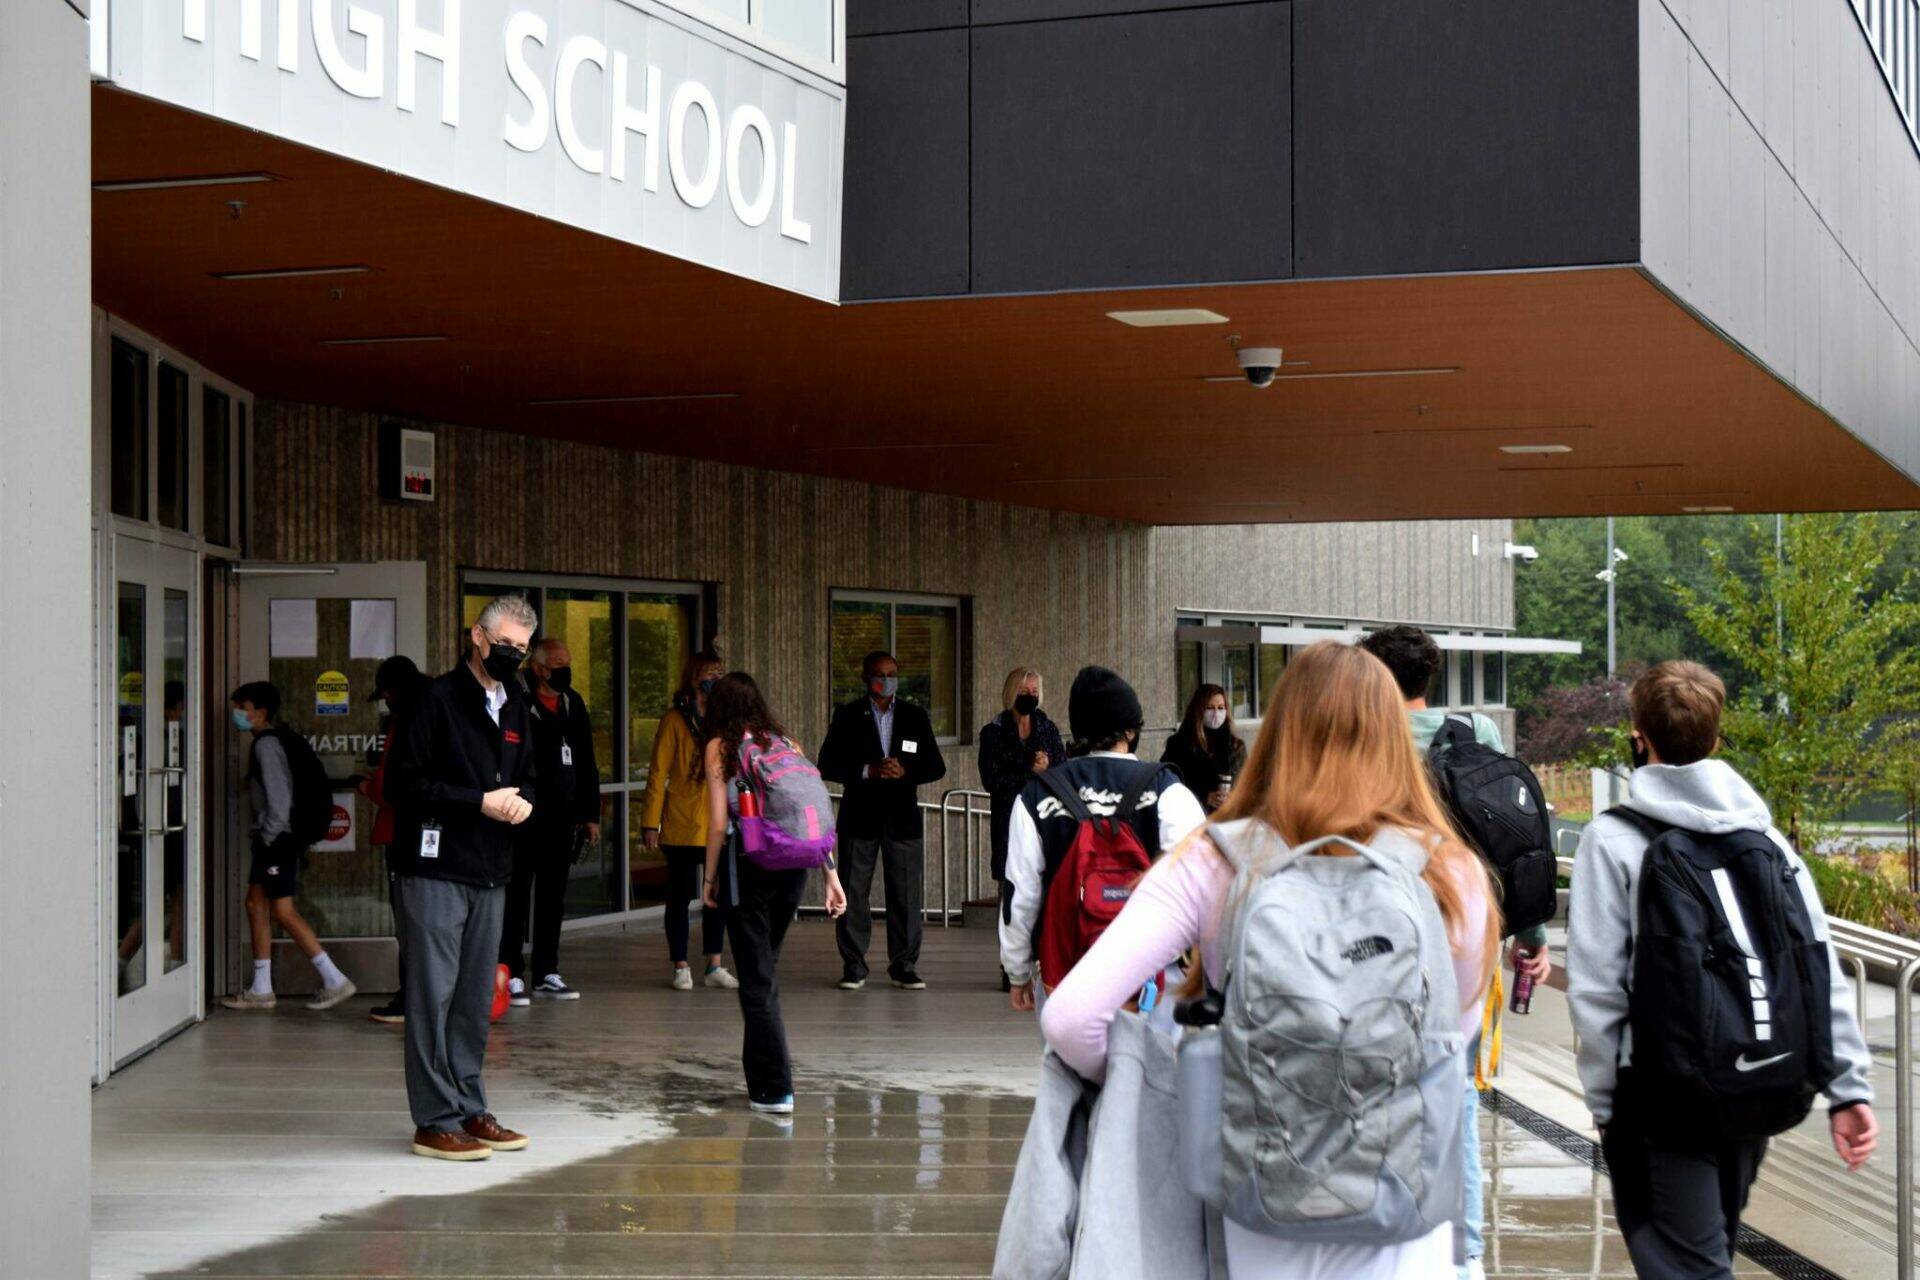 Mount Si High School students return to class for their first day of school, Aug. 31, 2022. Photo by Conor Wilson/Valley Record.